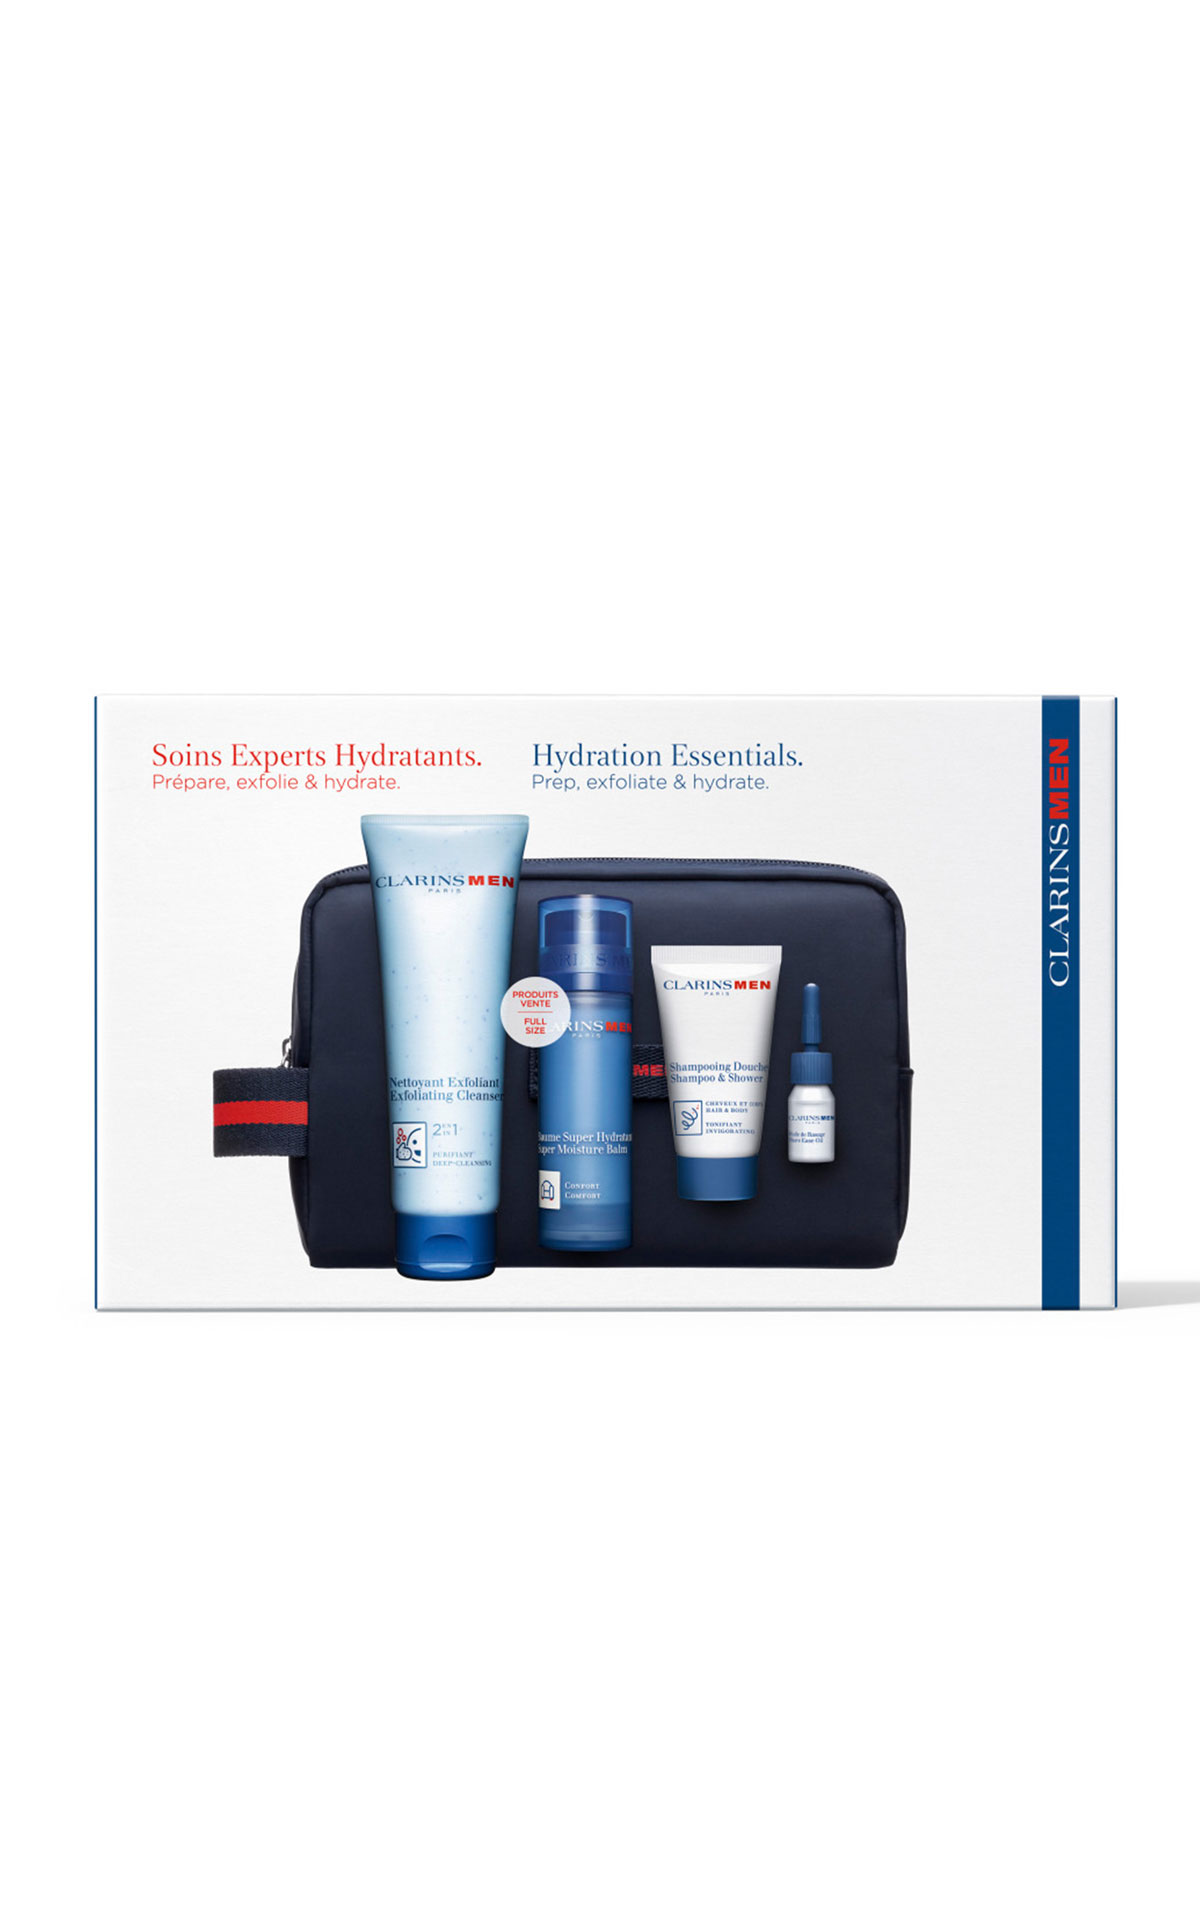 Clarins Xmas men hydration collection from Bicester Village